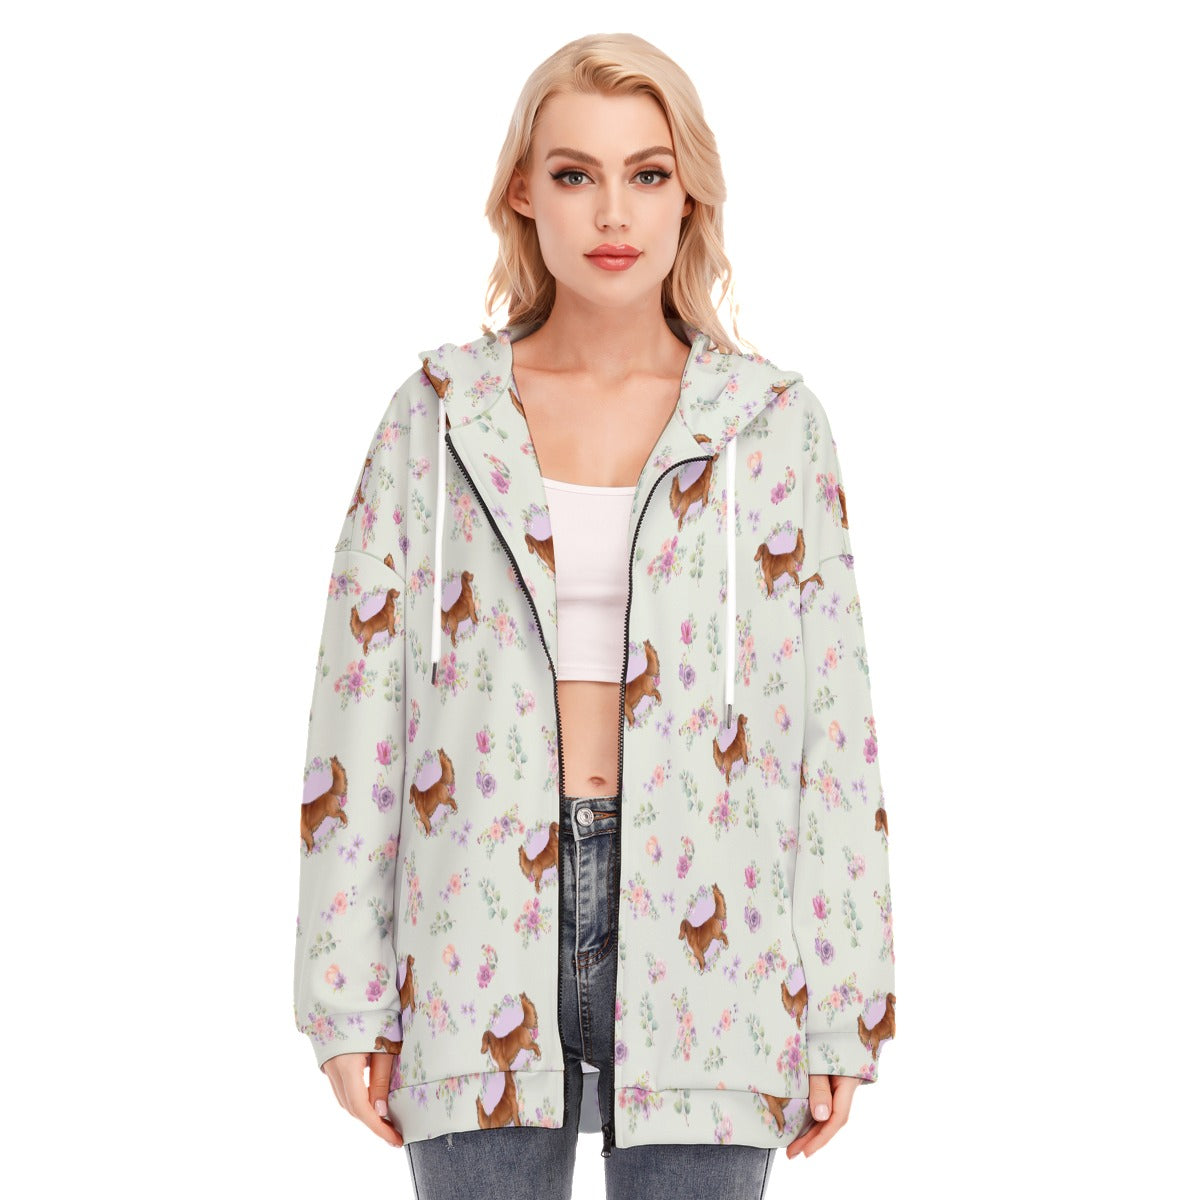 All-Over Print Women's Long Hoodie With Zipper Closure